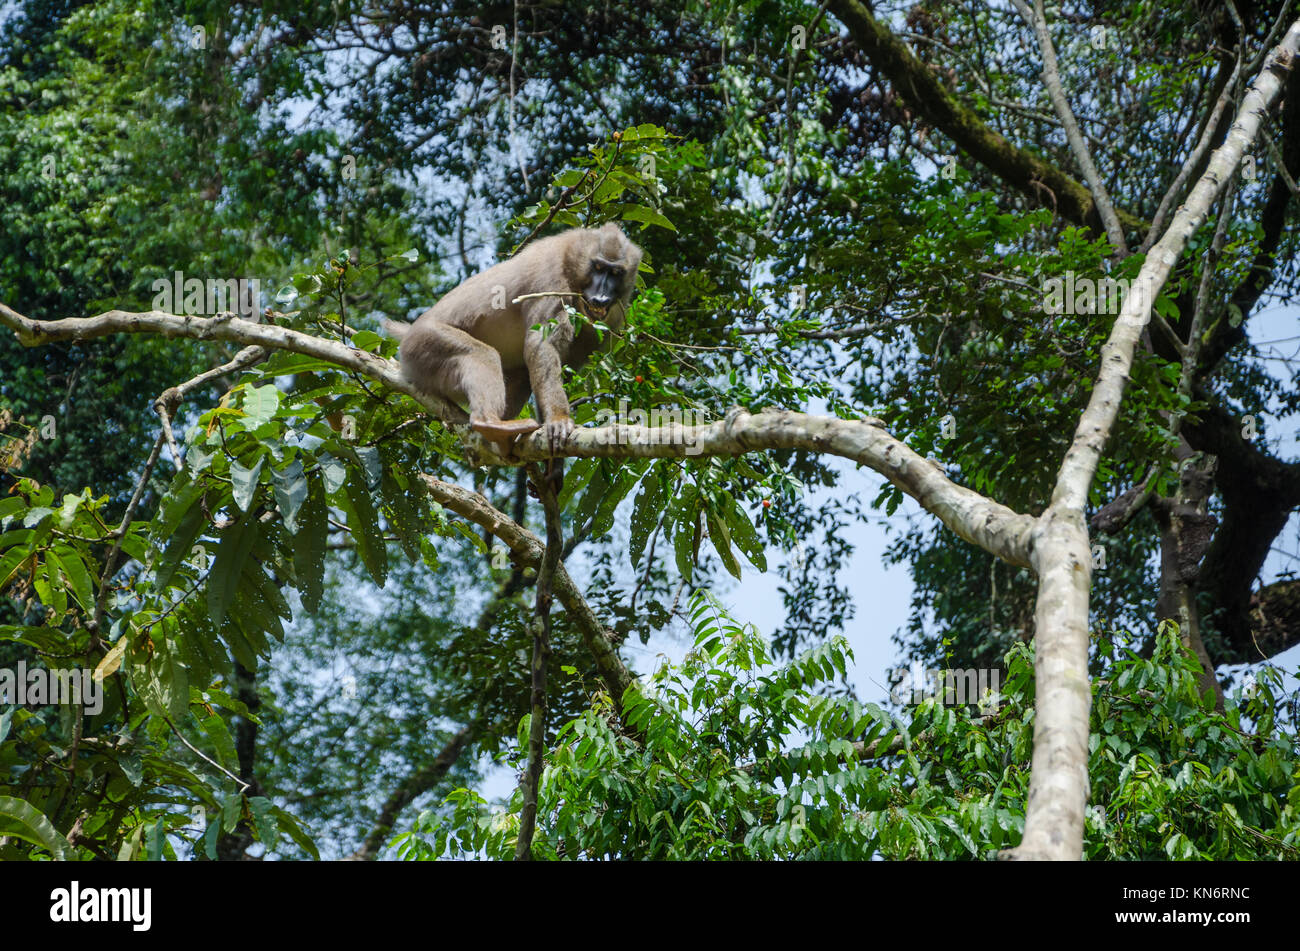 Drill monkey climbing tree and feeding on berries in rain forest of Nigeria Stock Photo